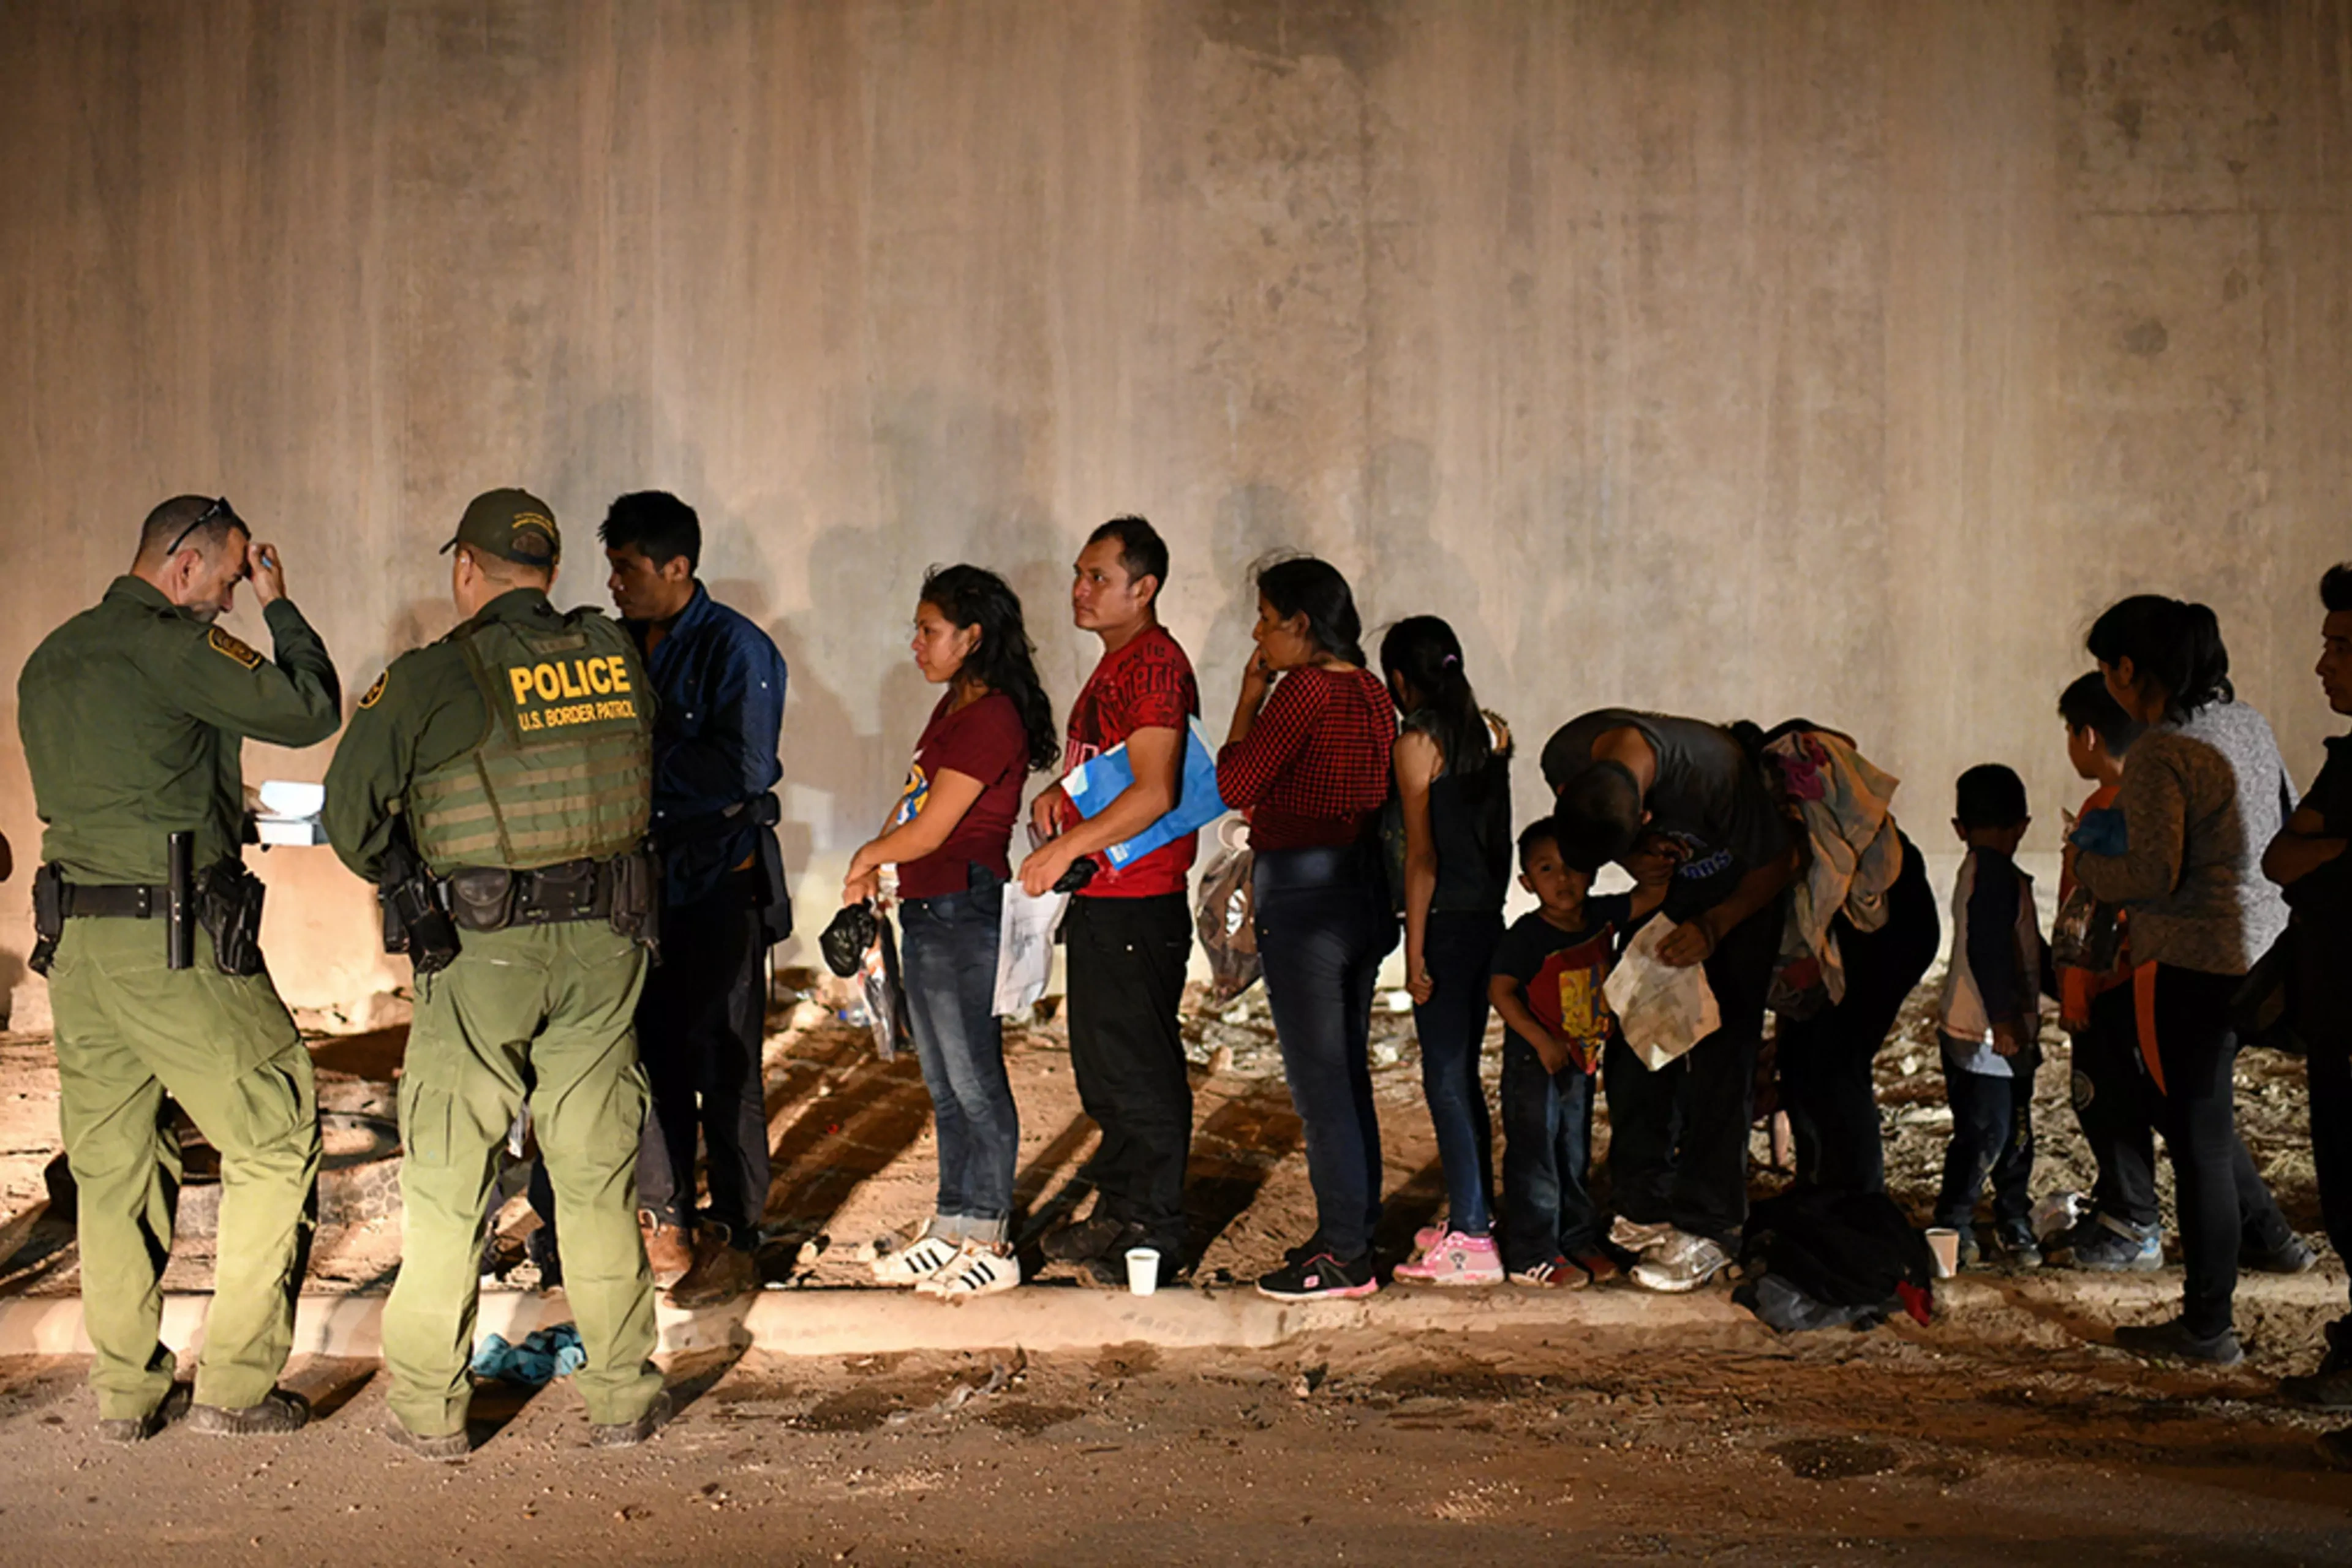 Why Did Illegal Immigration Apprehensions Suddenly Decrease?